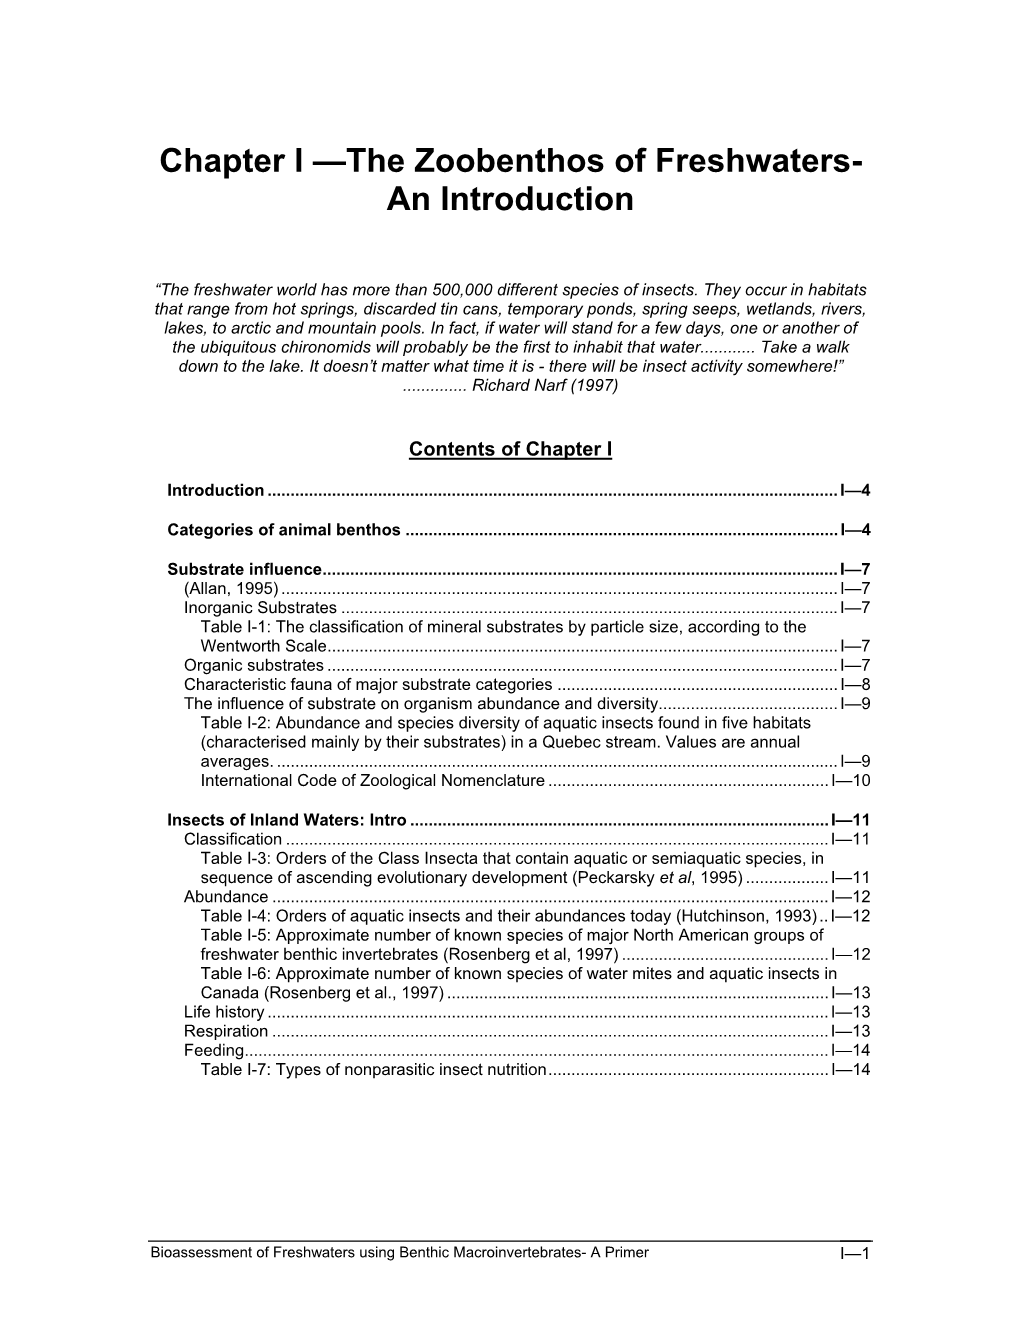 Chapter I —The Zoobenthos of Freshwaters- an Introduction